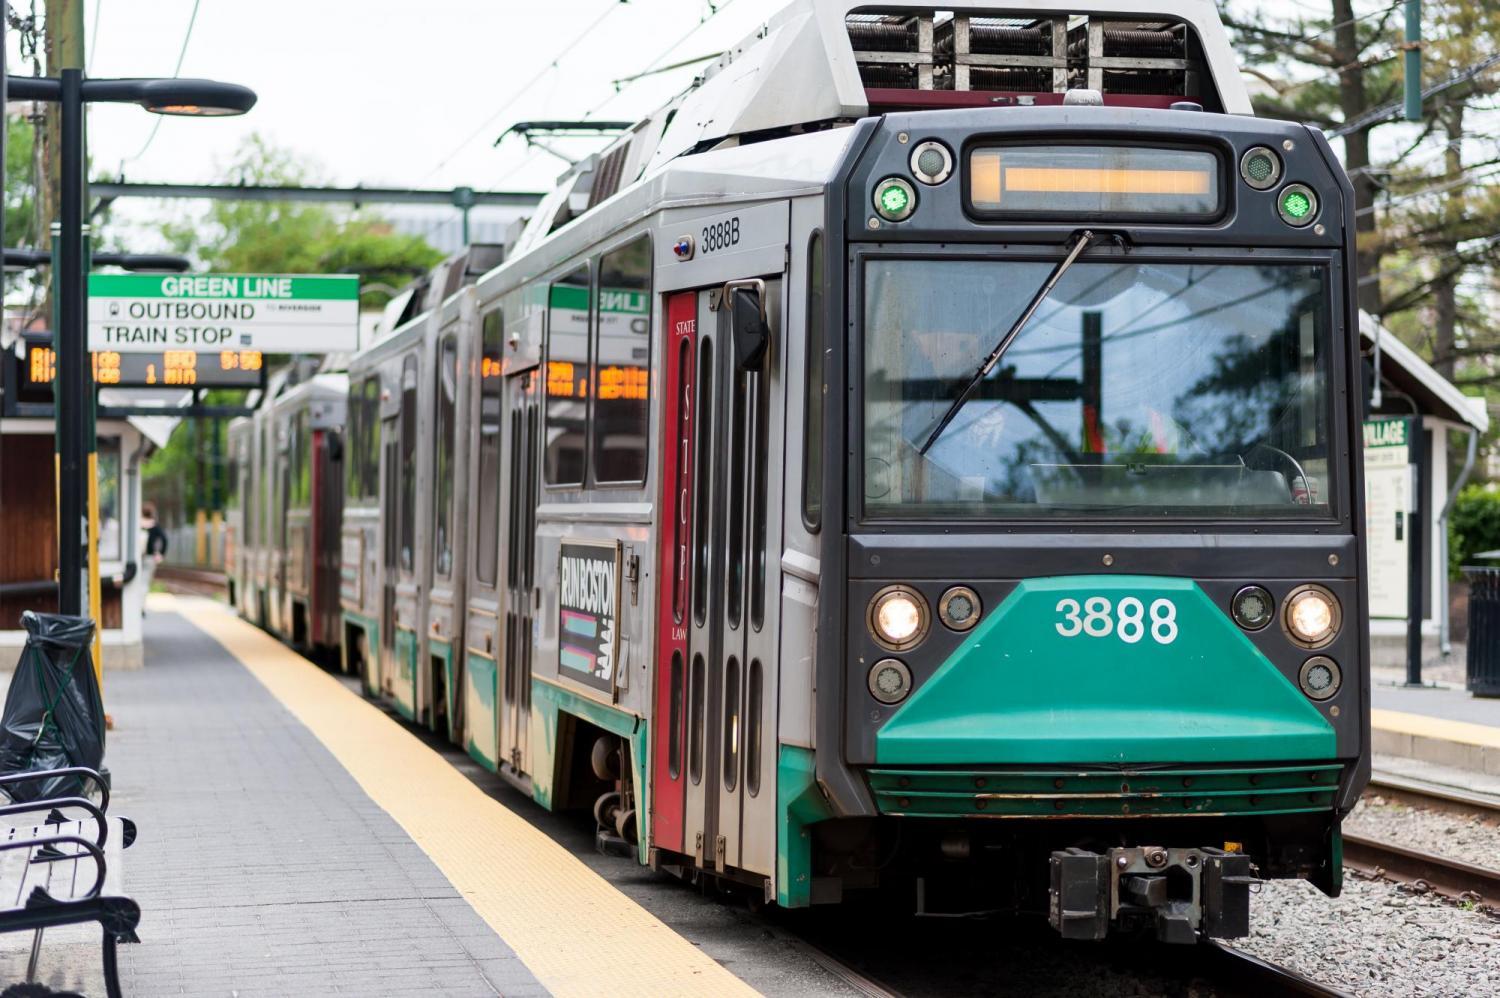 A Green Line train pulls into a station